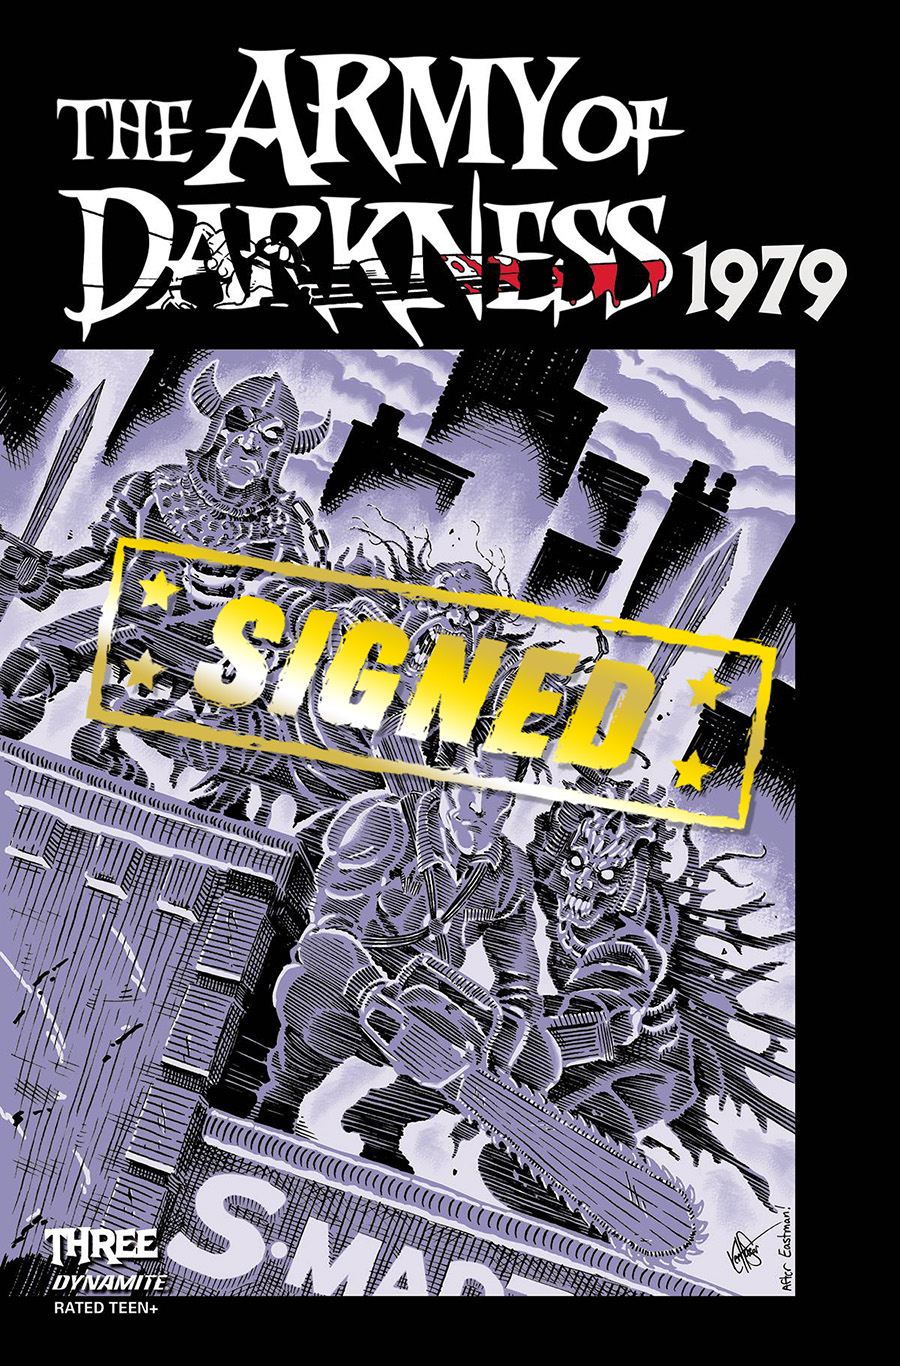 Army Of Darkness 1979 #3 Cover Q DF Ken Haeser TMNT Homage Variant Cover Signed & Remarked By Ken Haeser